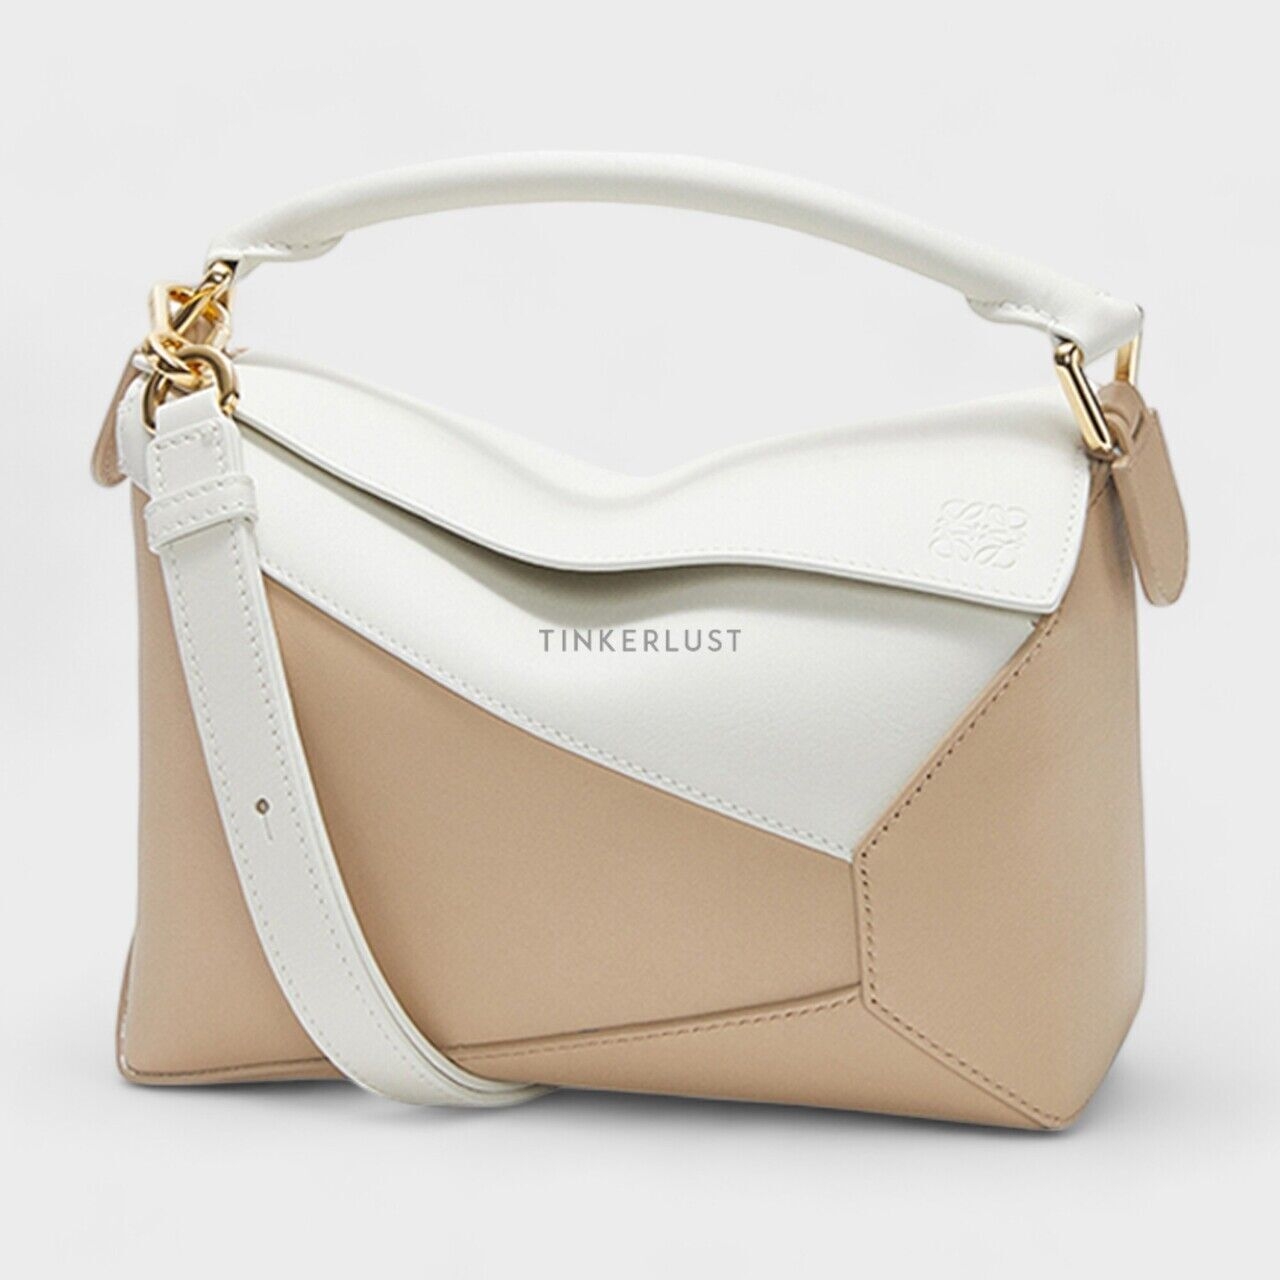 Loewe Small Puzzle Bag in Soft White/Paper Craft Classic Calfskin Satchel Bag